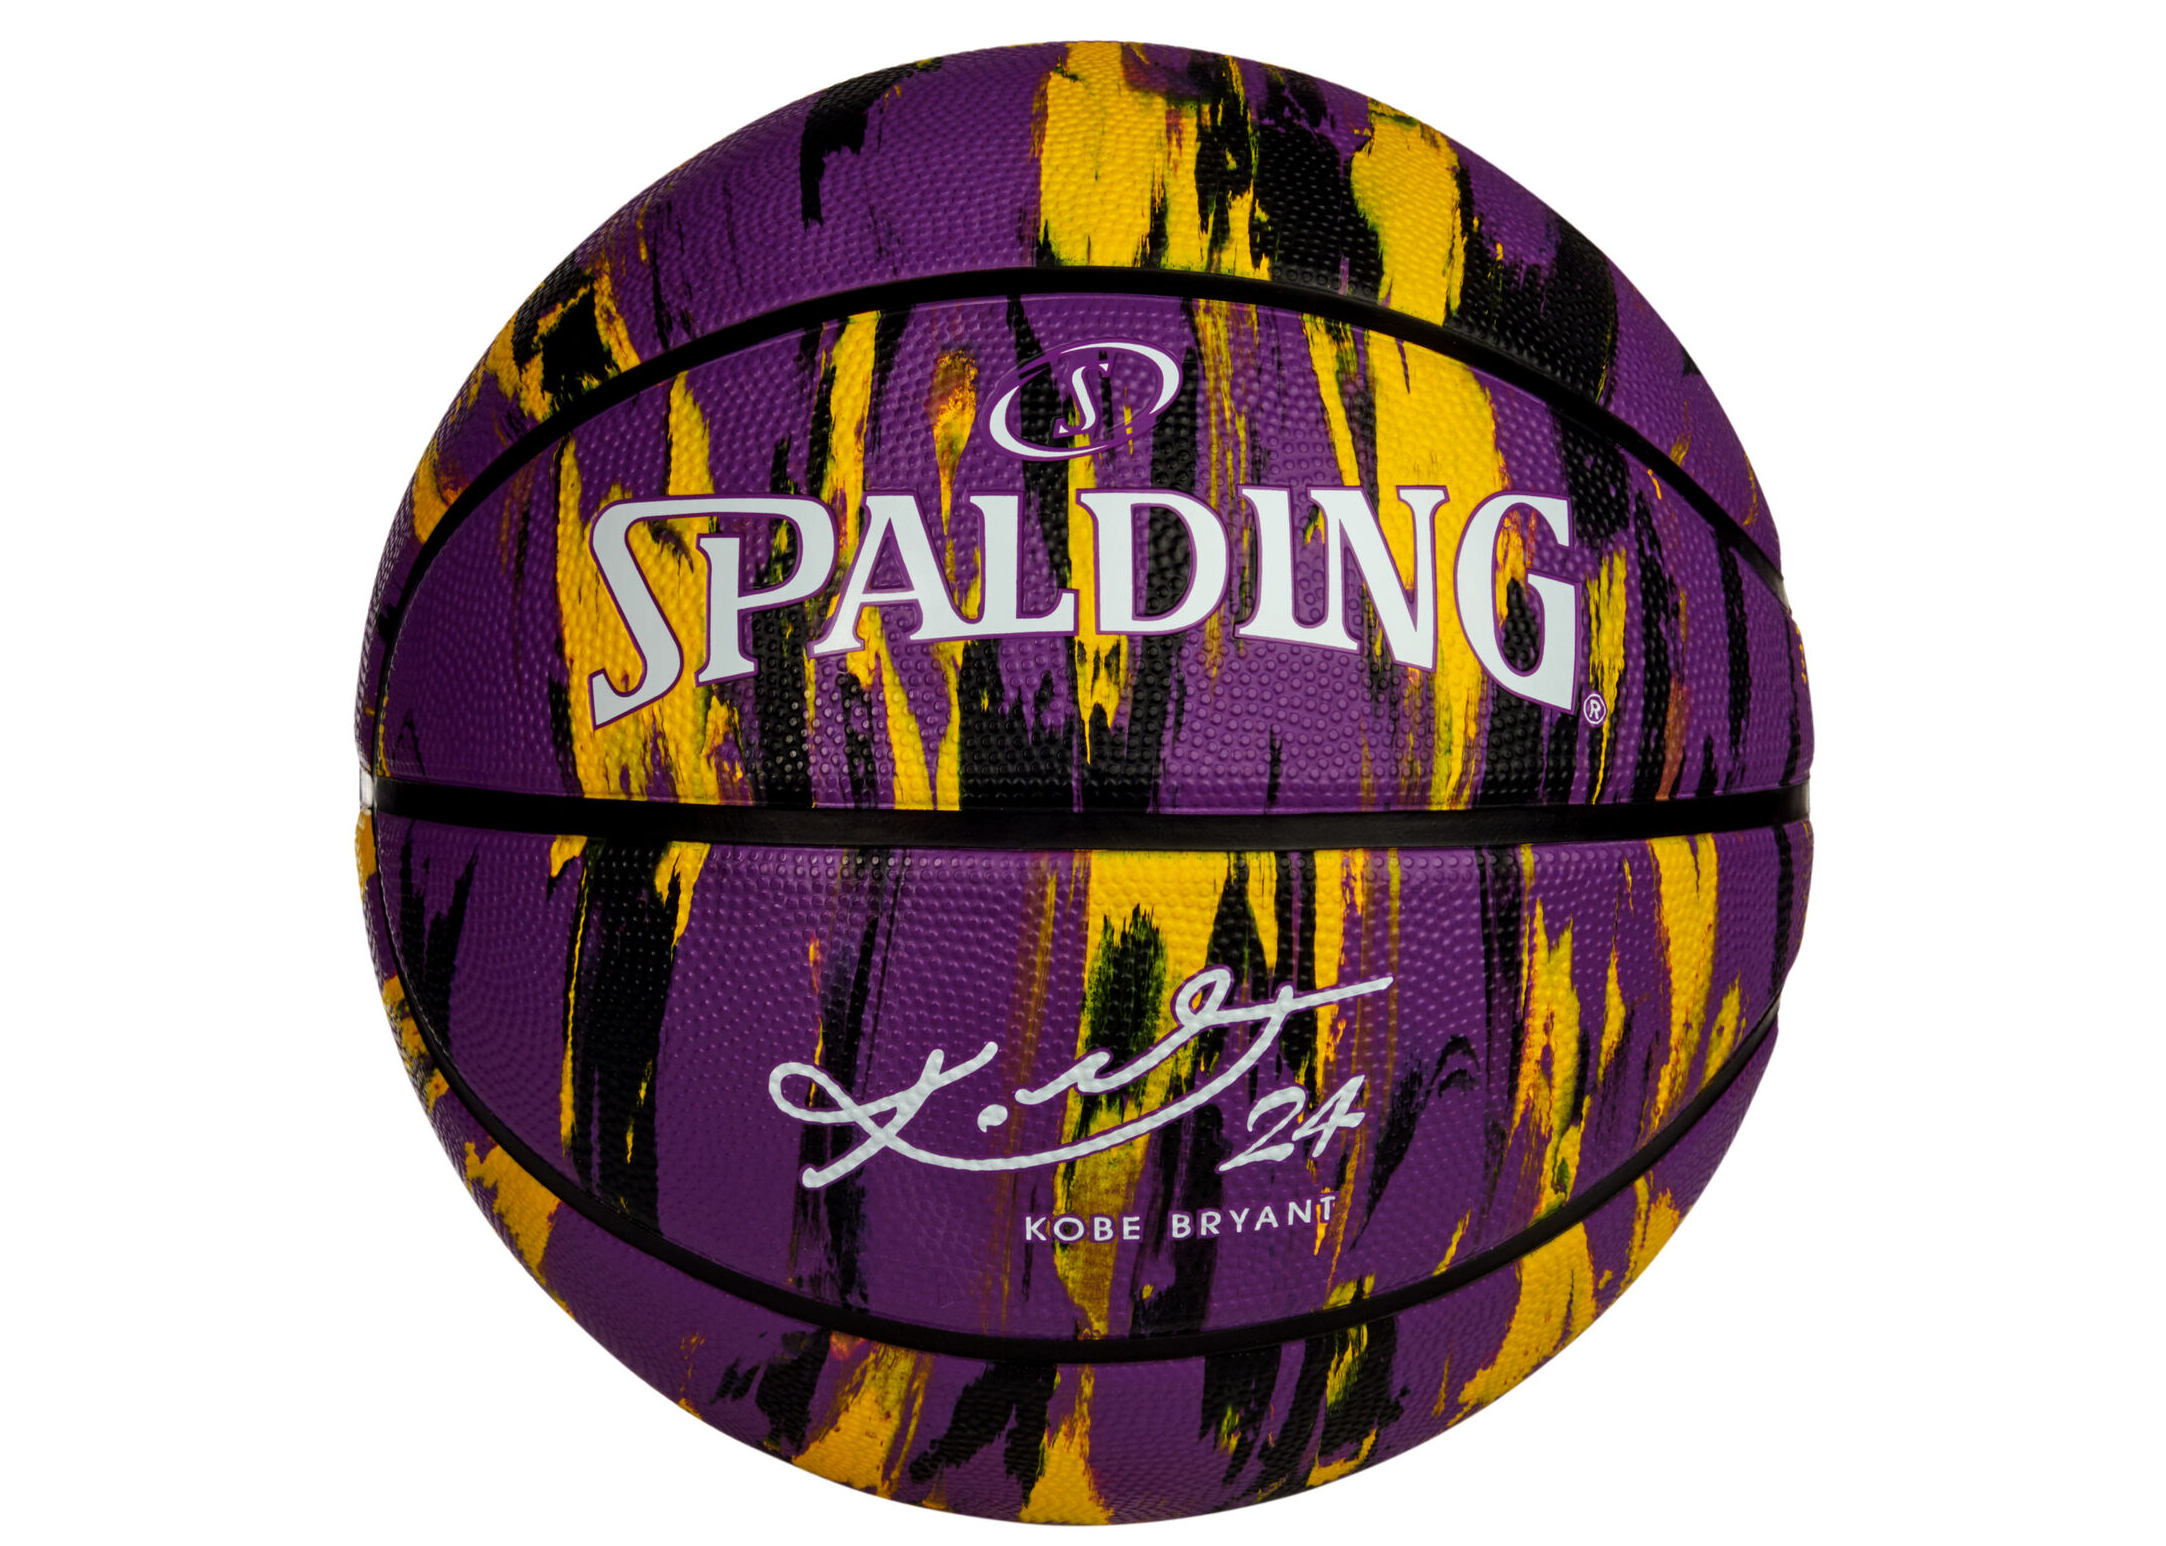 Spalding x Kobe Bryant Marble Series LIMITED EDITION Basketball 